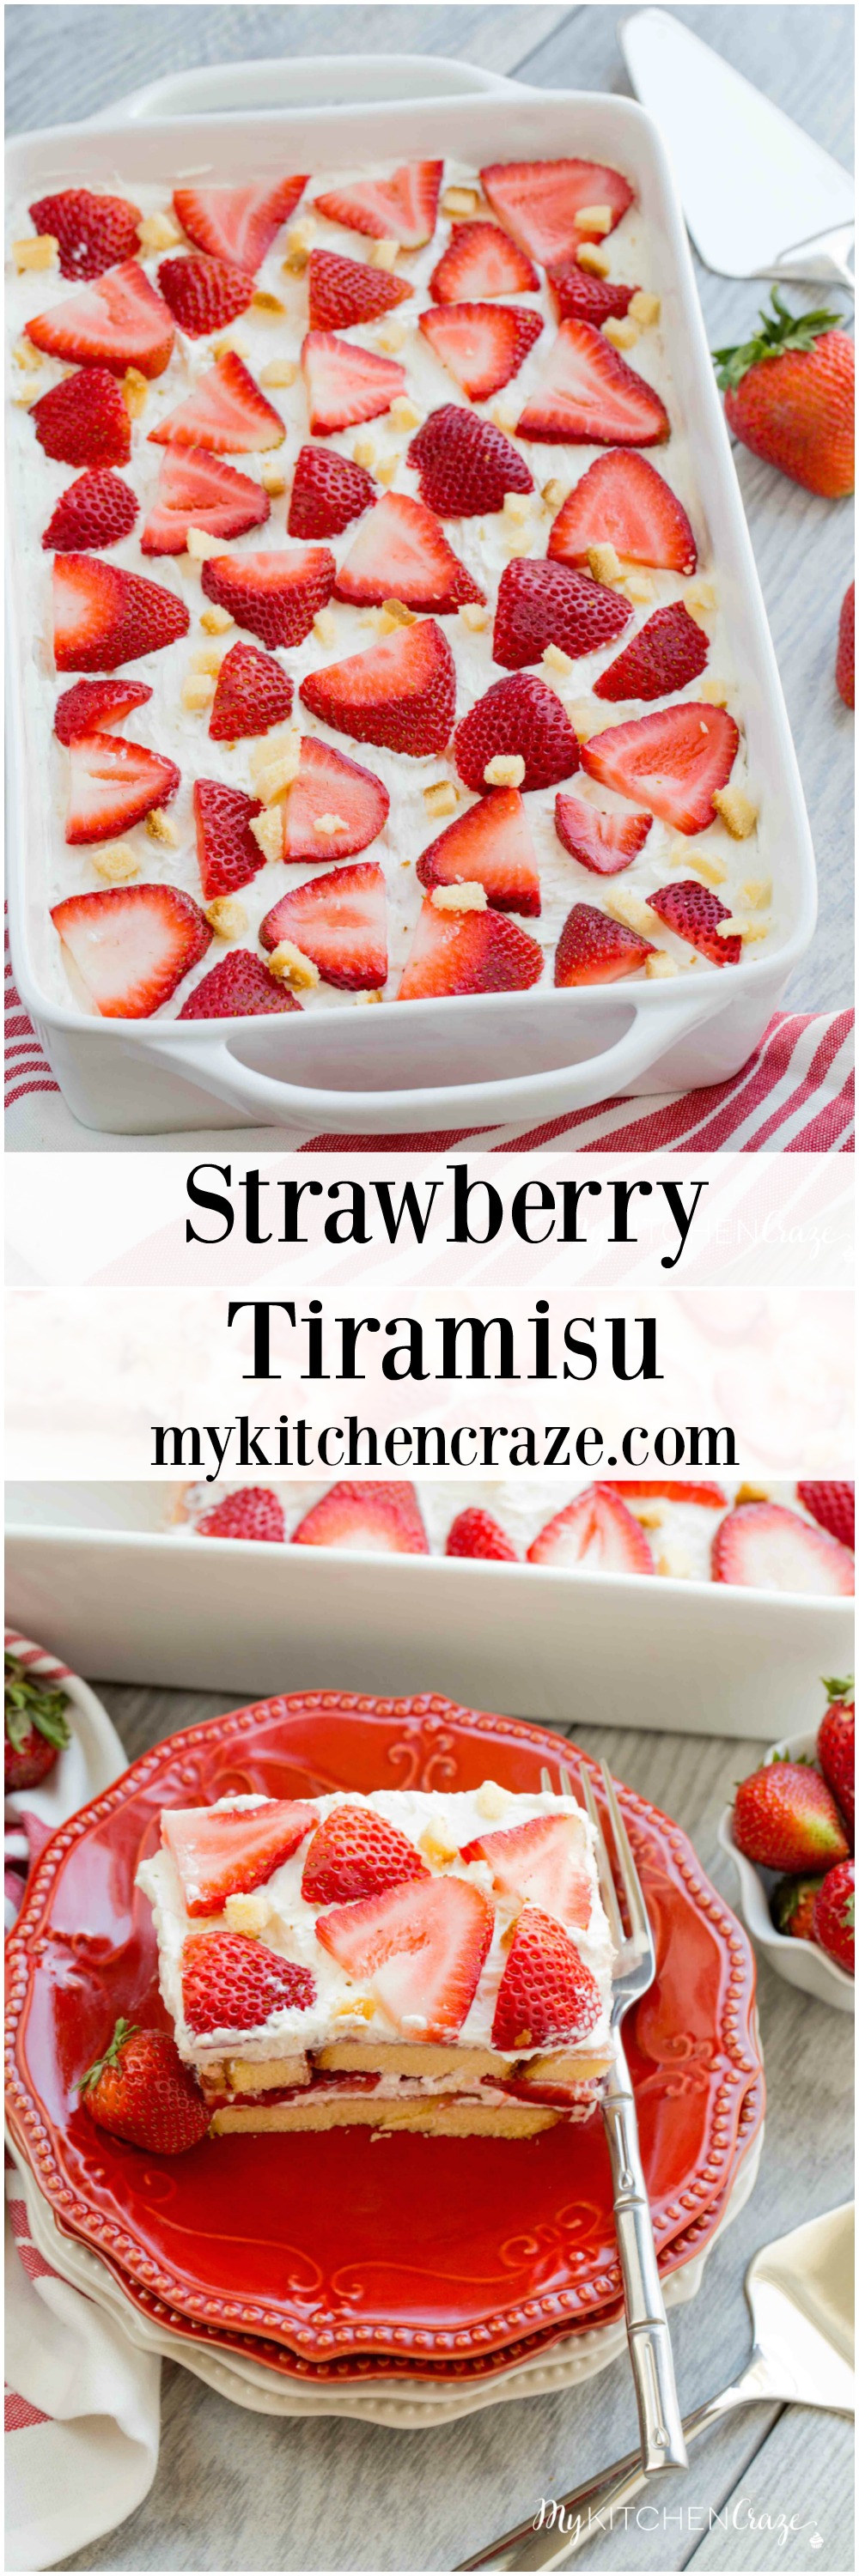 Strawberry Tiramisu ~ mykitchencraze.com ~ Enjoy this delicious and fun twist on tiramisu! Loaded with strawberries, pound cake, mascarpone cheese and cool whip. This is one dessert you won't be able to pass up!